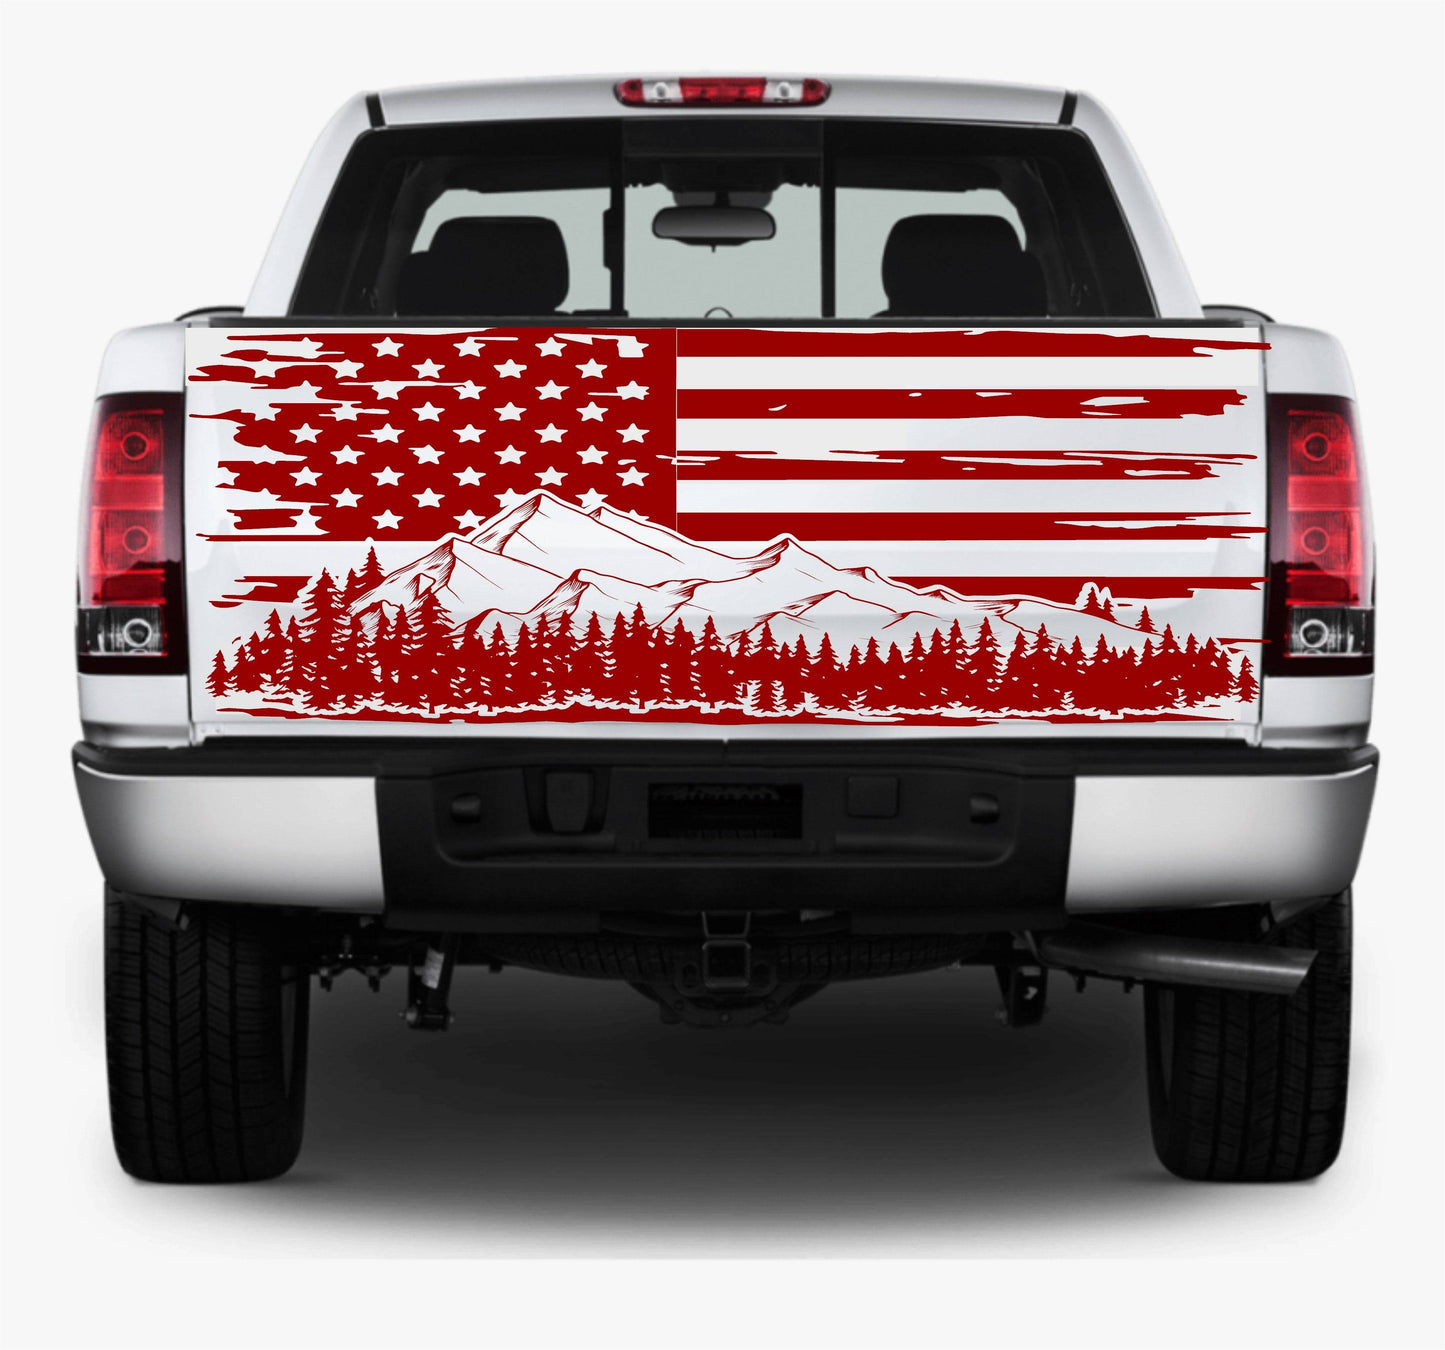 Distressed American Flag Decal Stickers Mountain Silhouette Patriotic Vinyl Decal for Any Trucks, SUV's, Vans, Tailgates, Bumpers...